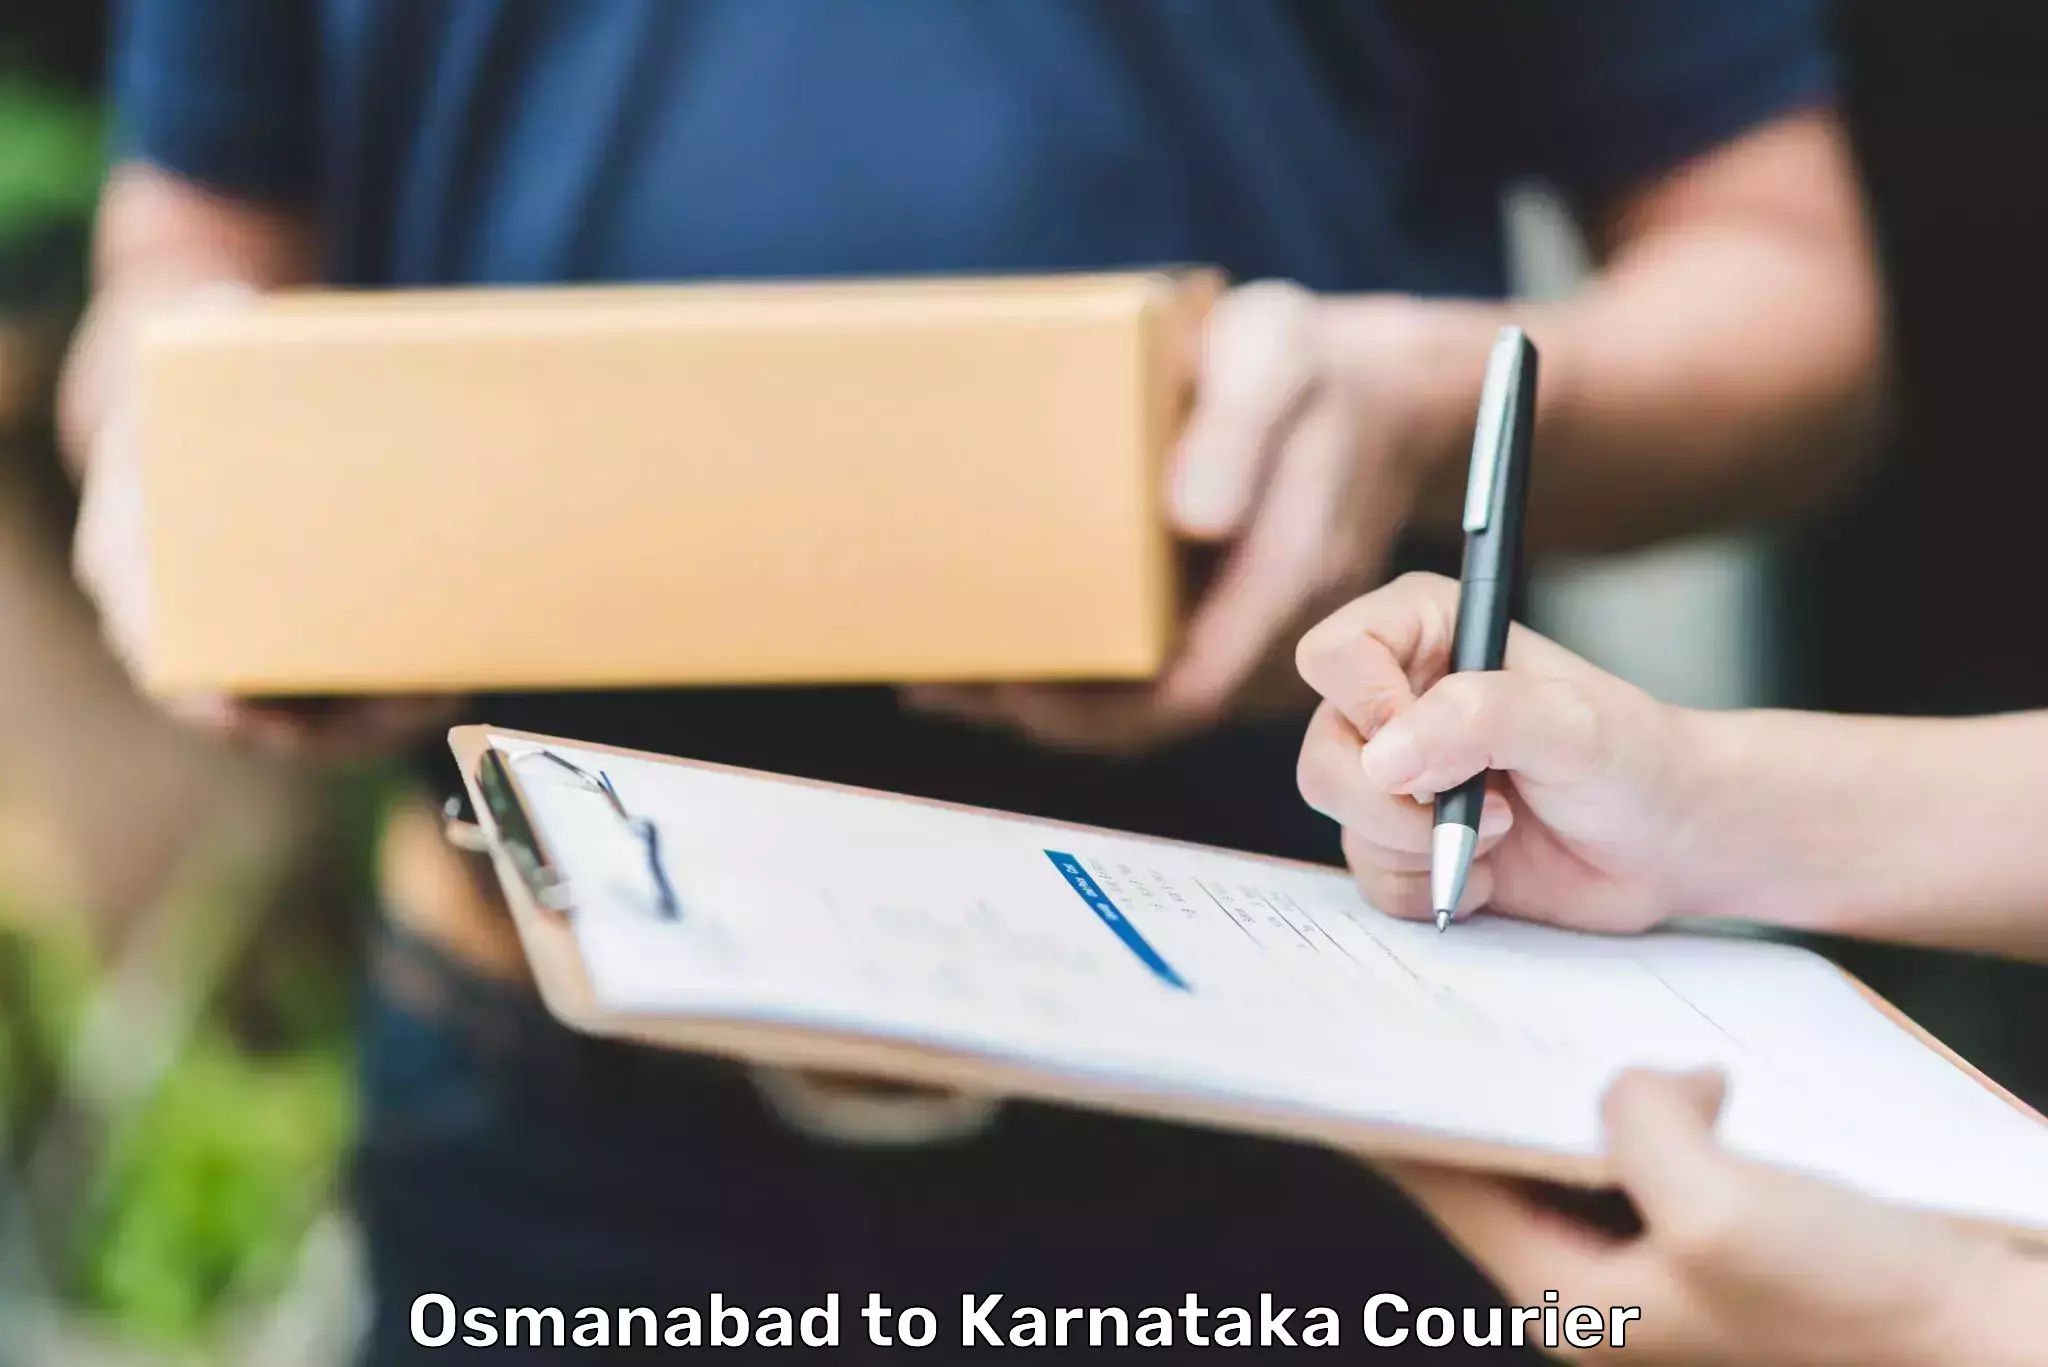 Parcel service for businesses Osmanabad to Chitradurga